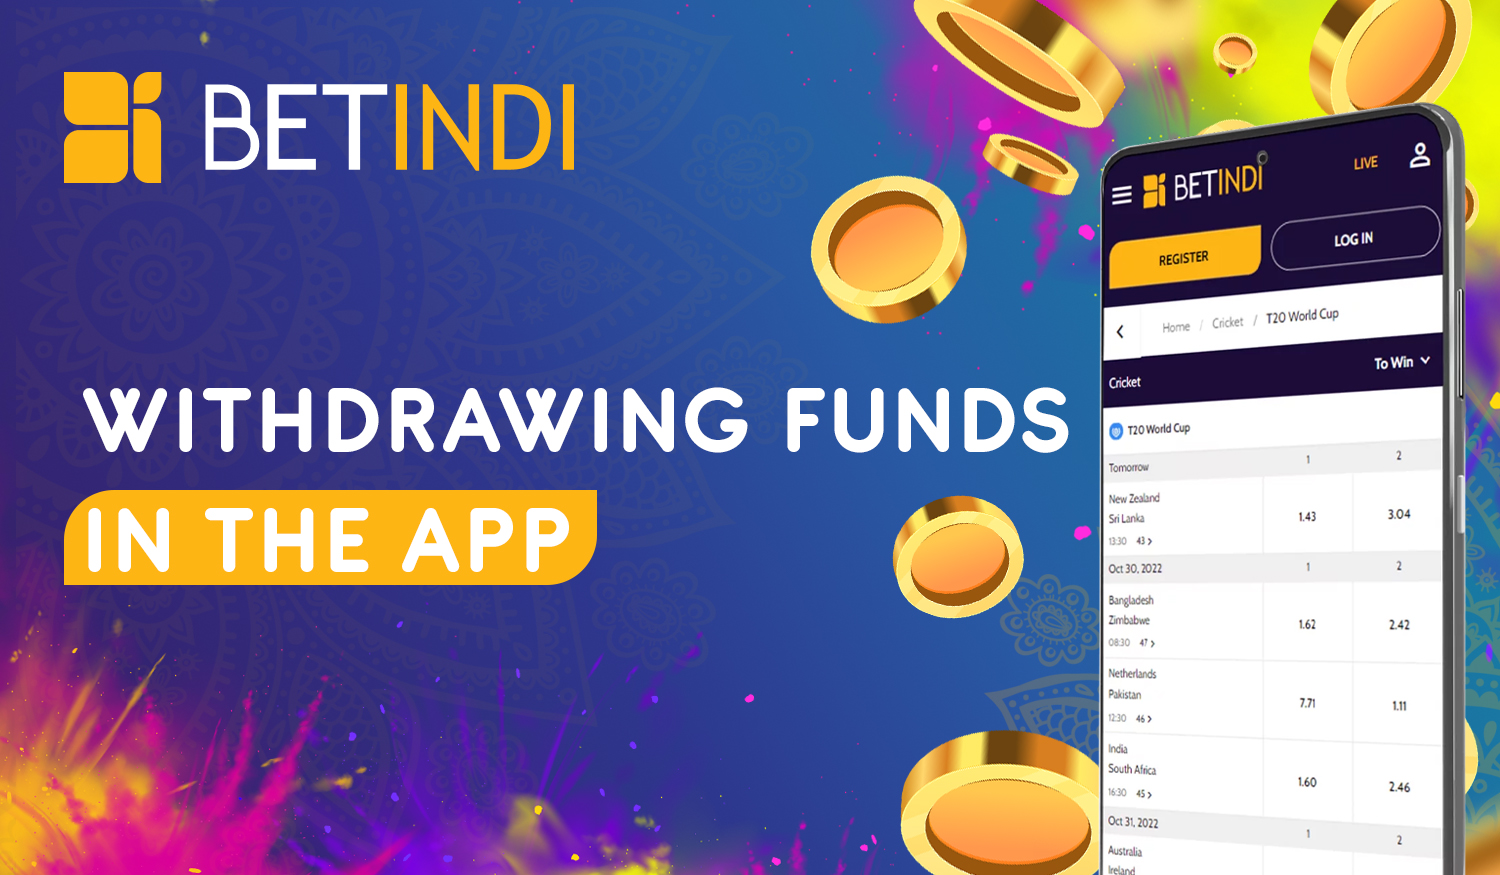 How Indian members can withdraw funds from Betindi using mobile app